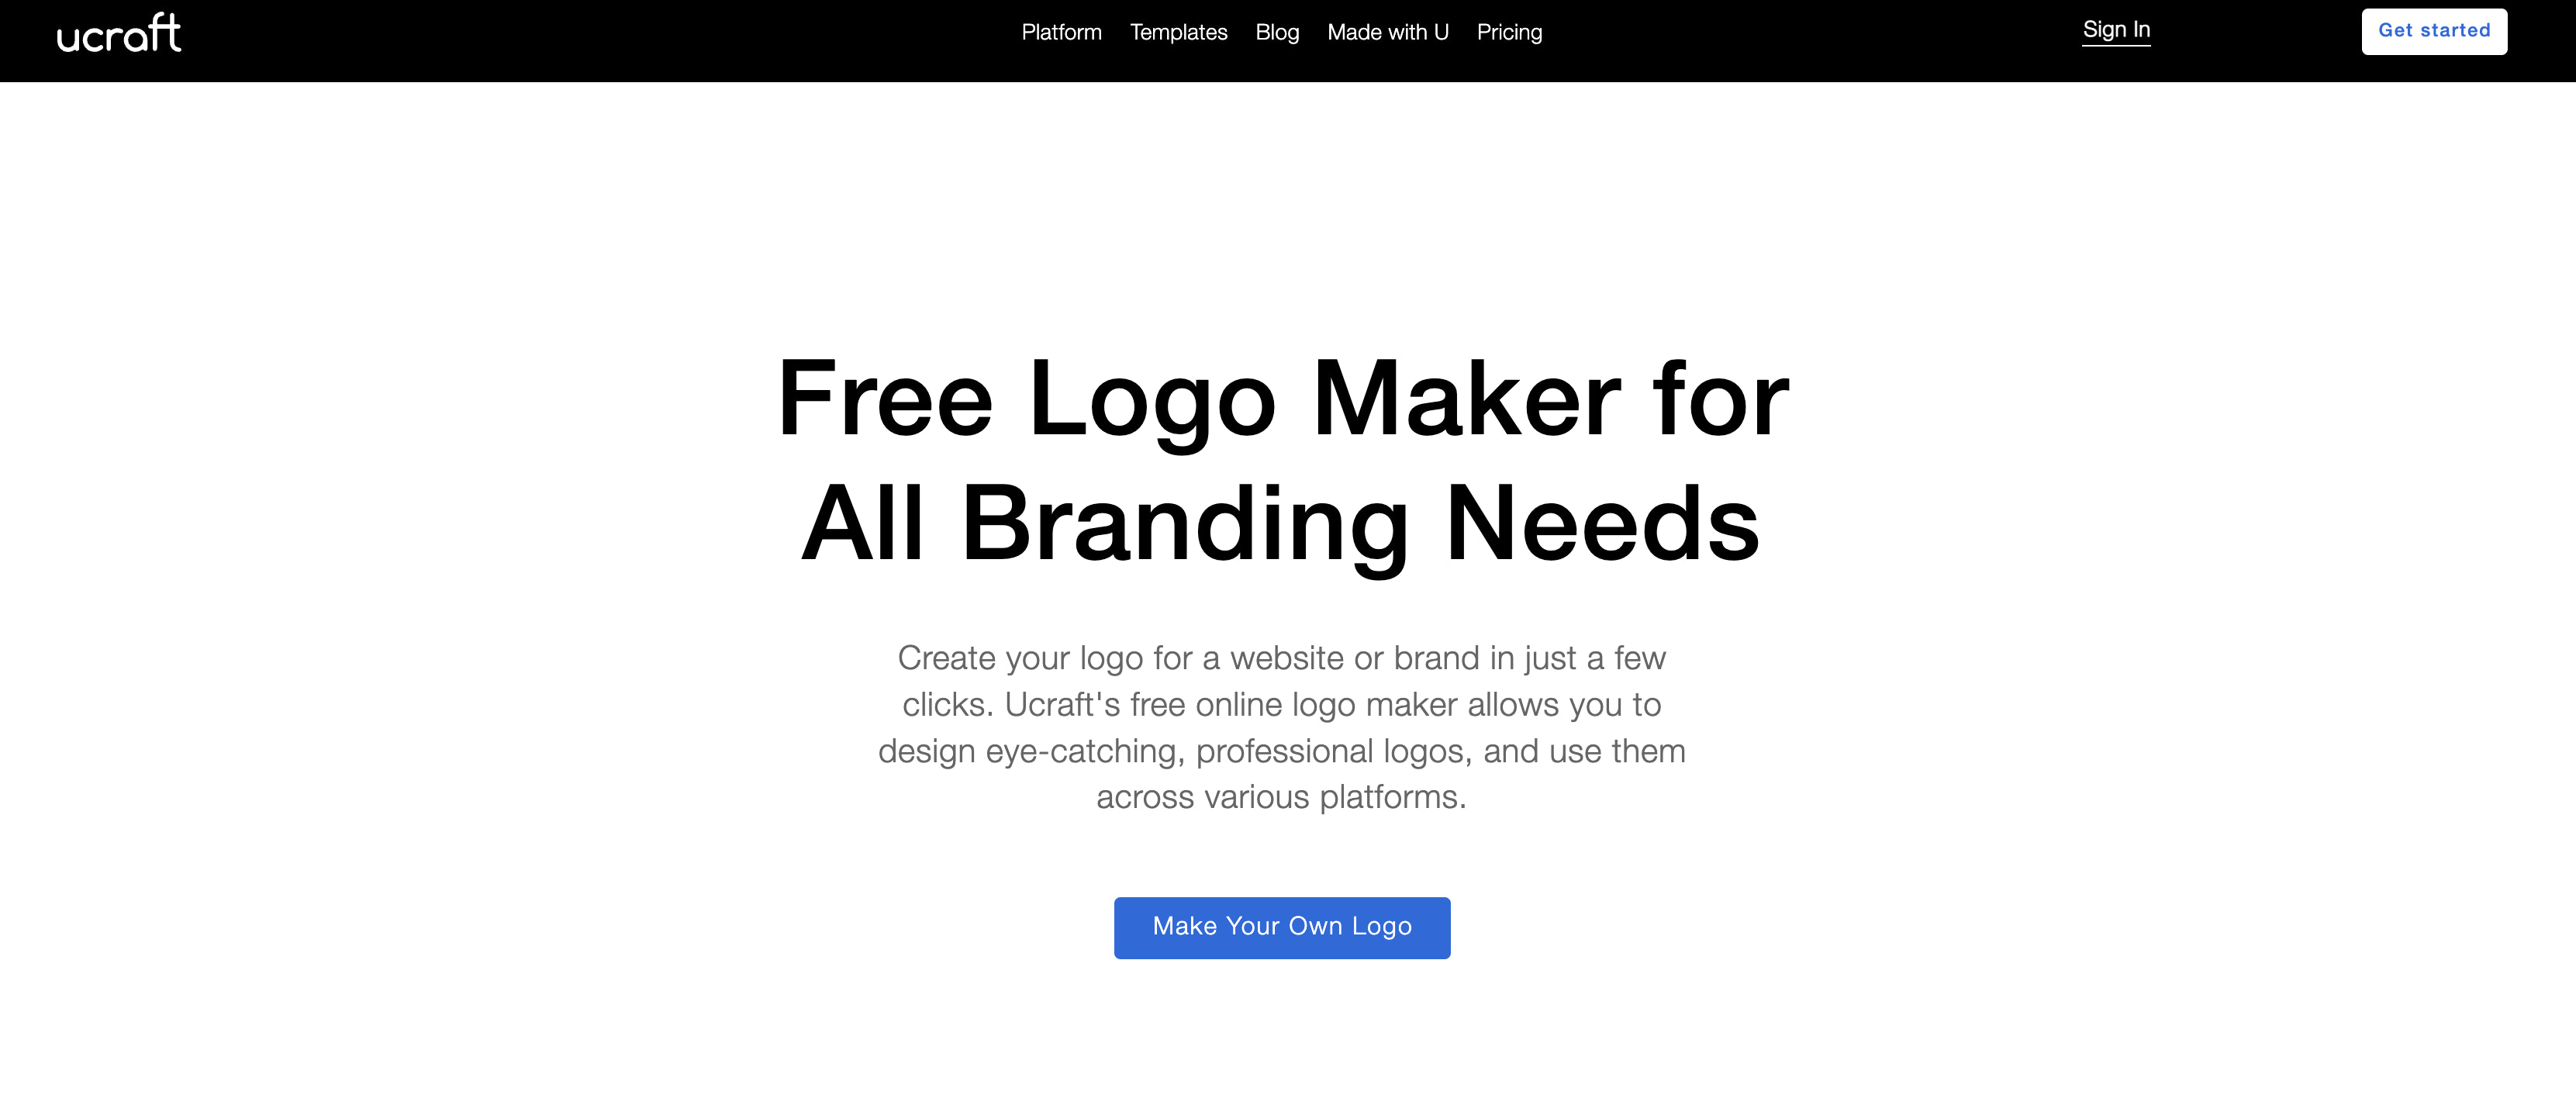 Why to Try a Black and White Brand Logo Identity: Create your own Logo